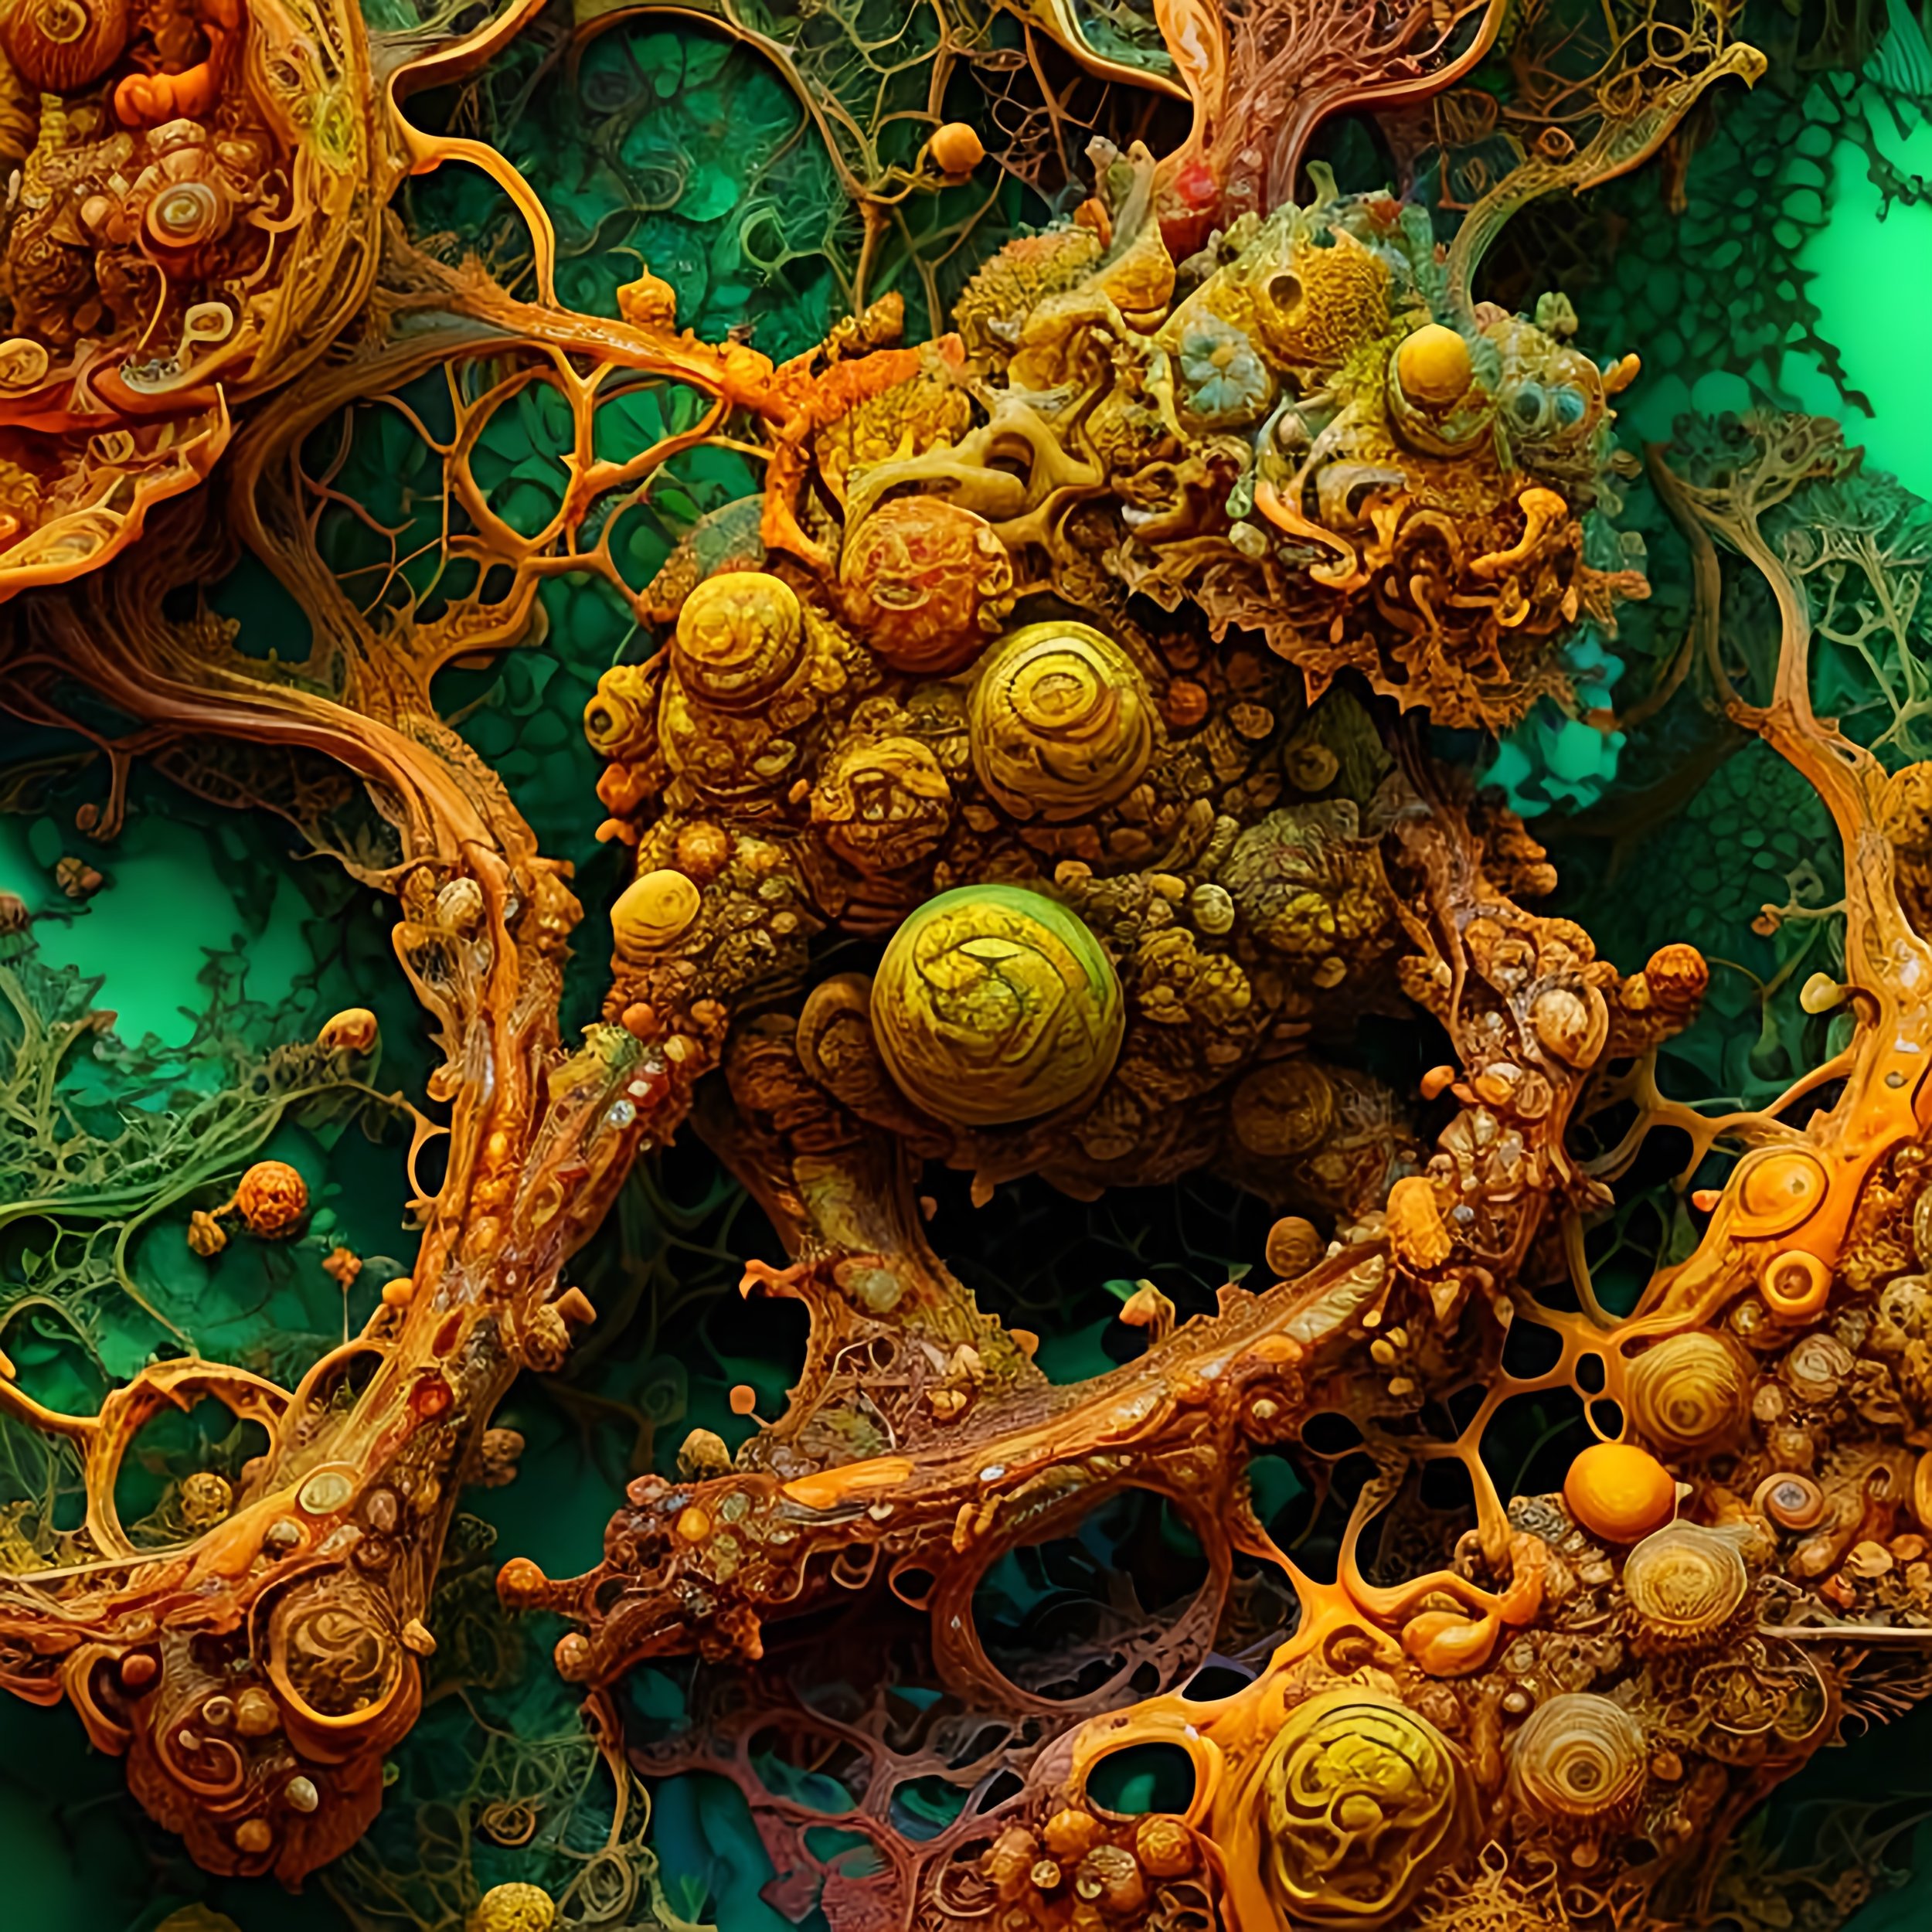 biomorphic-organic-fractals-mustard-yellow-and-pickle-green-and-eggshell-w...te-details-highly-detailed-photo-realistic-octane-render-8k-unreal-engine_2RQOTYNW_upscaled.jpg